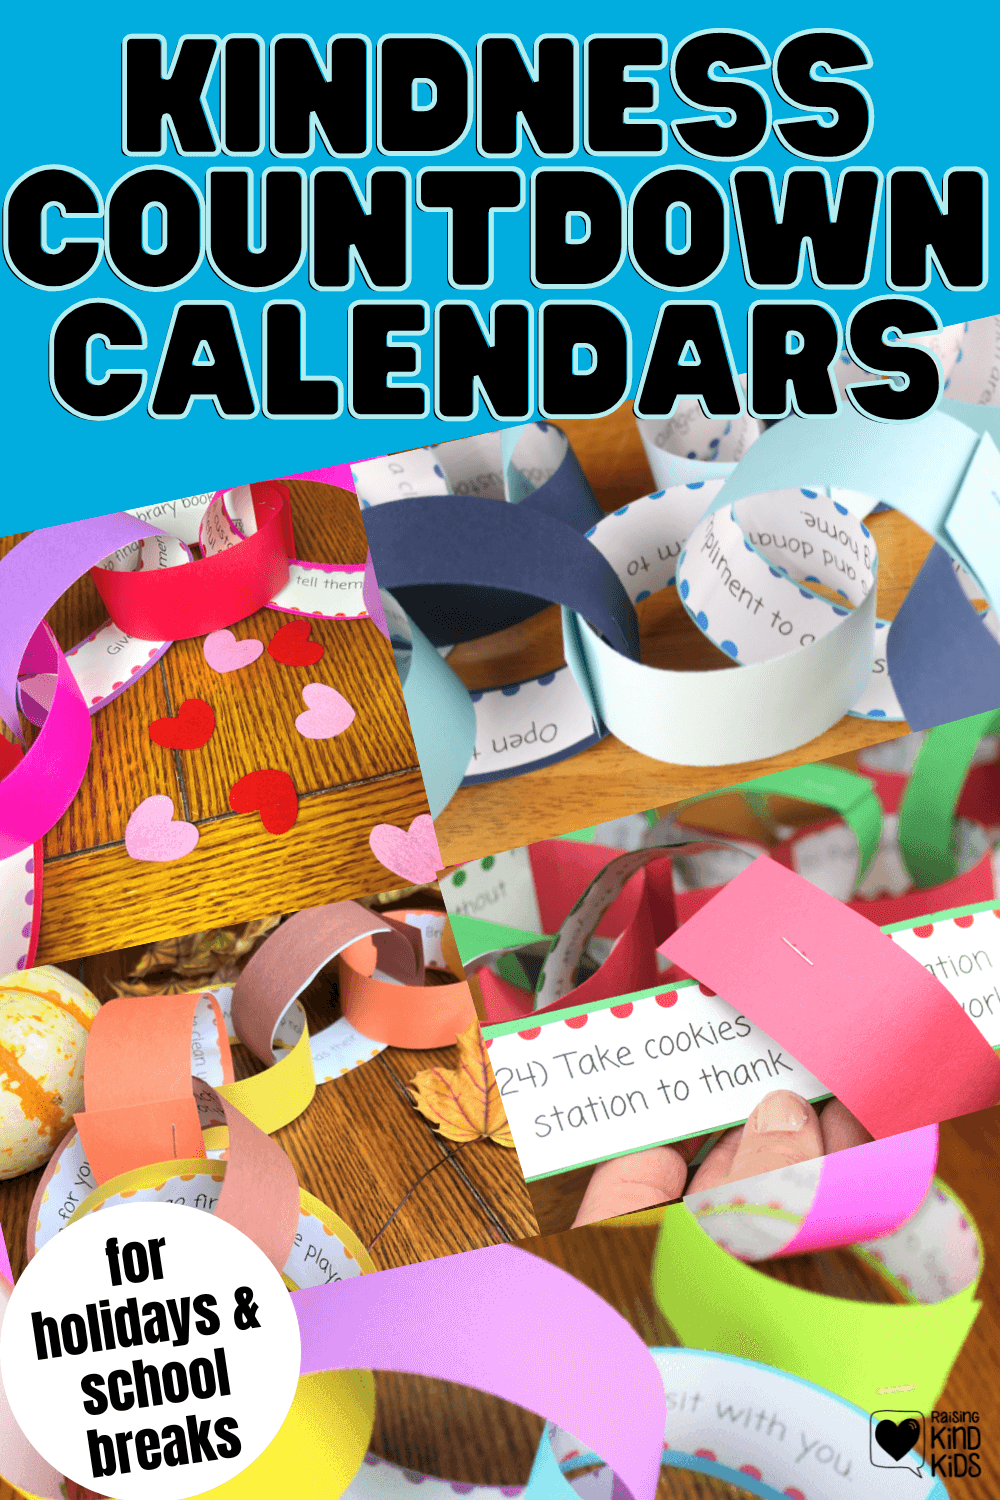 These kindness countdown calendars are a perfect way to spread kindness as you count down to holidays and school breaks.